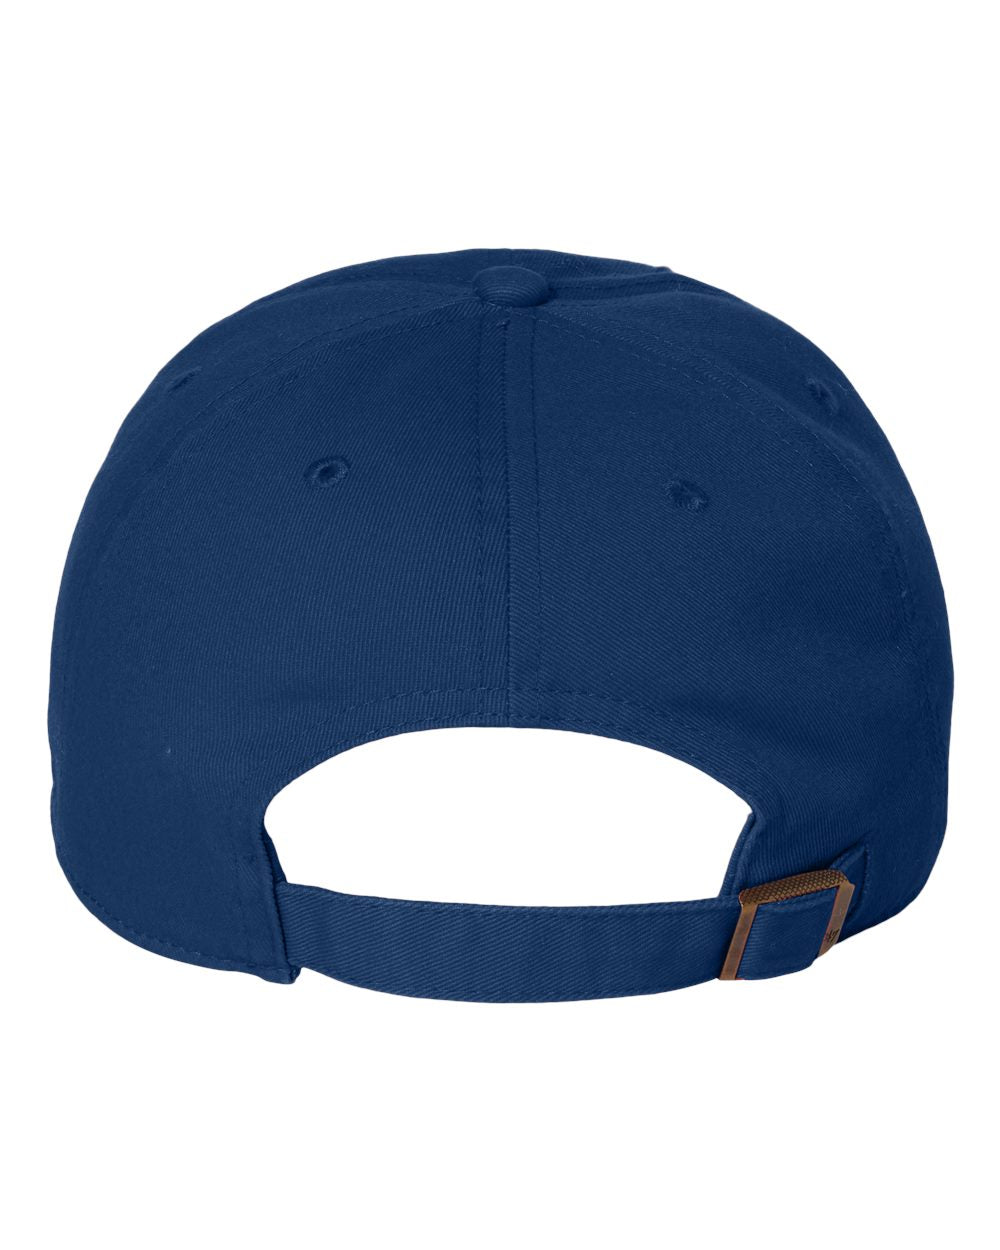 47' Brand Clean Up Unstructured Low Profile Cap 4700